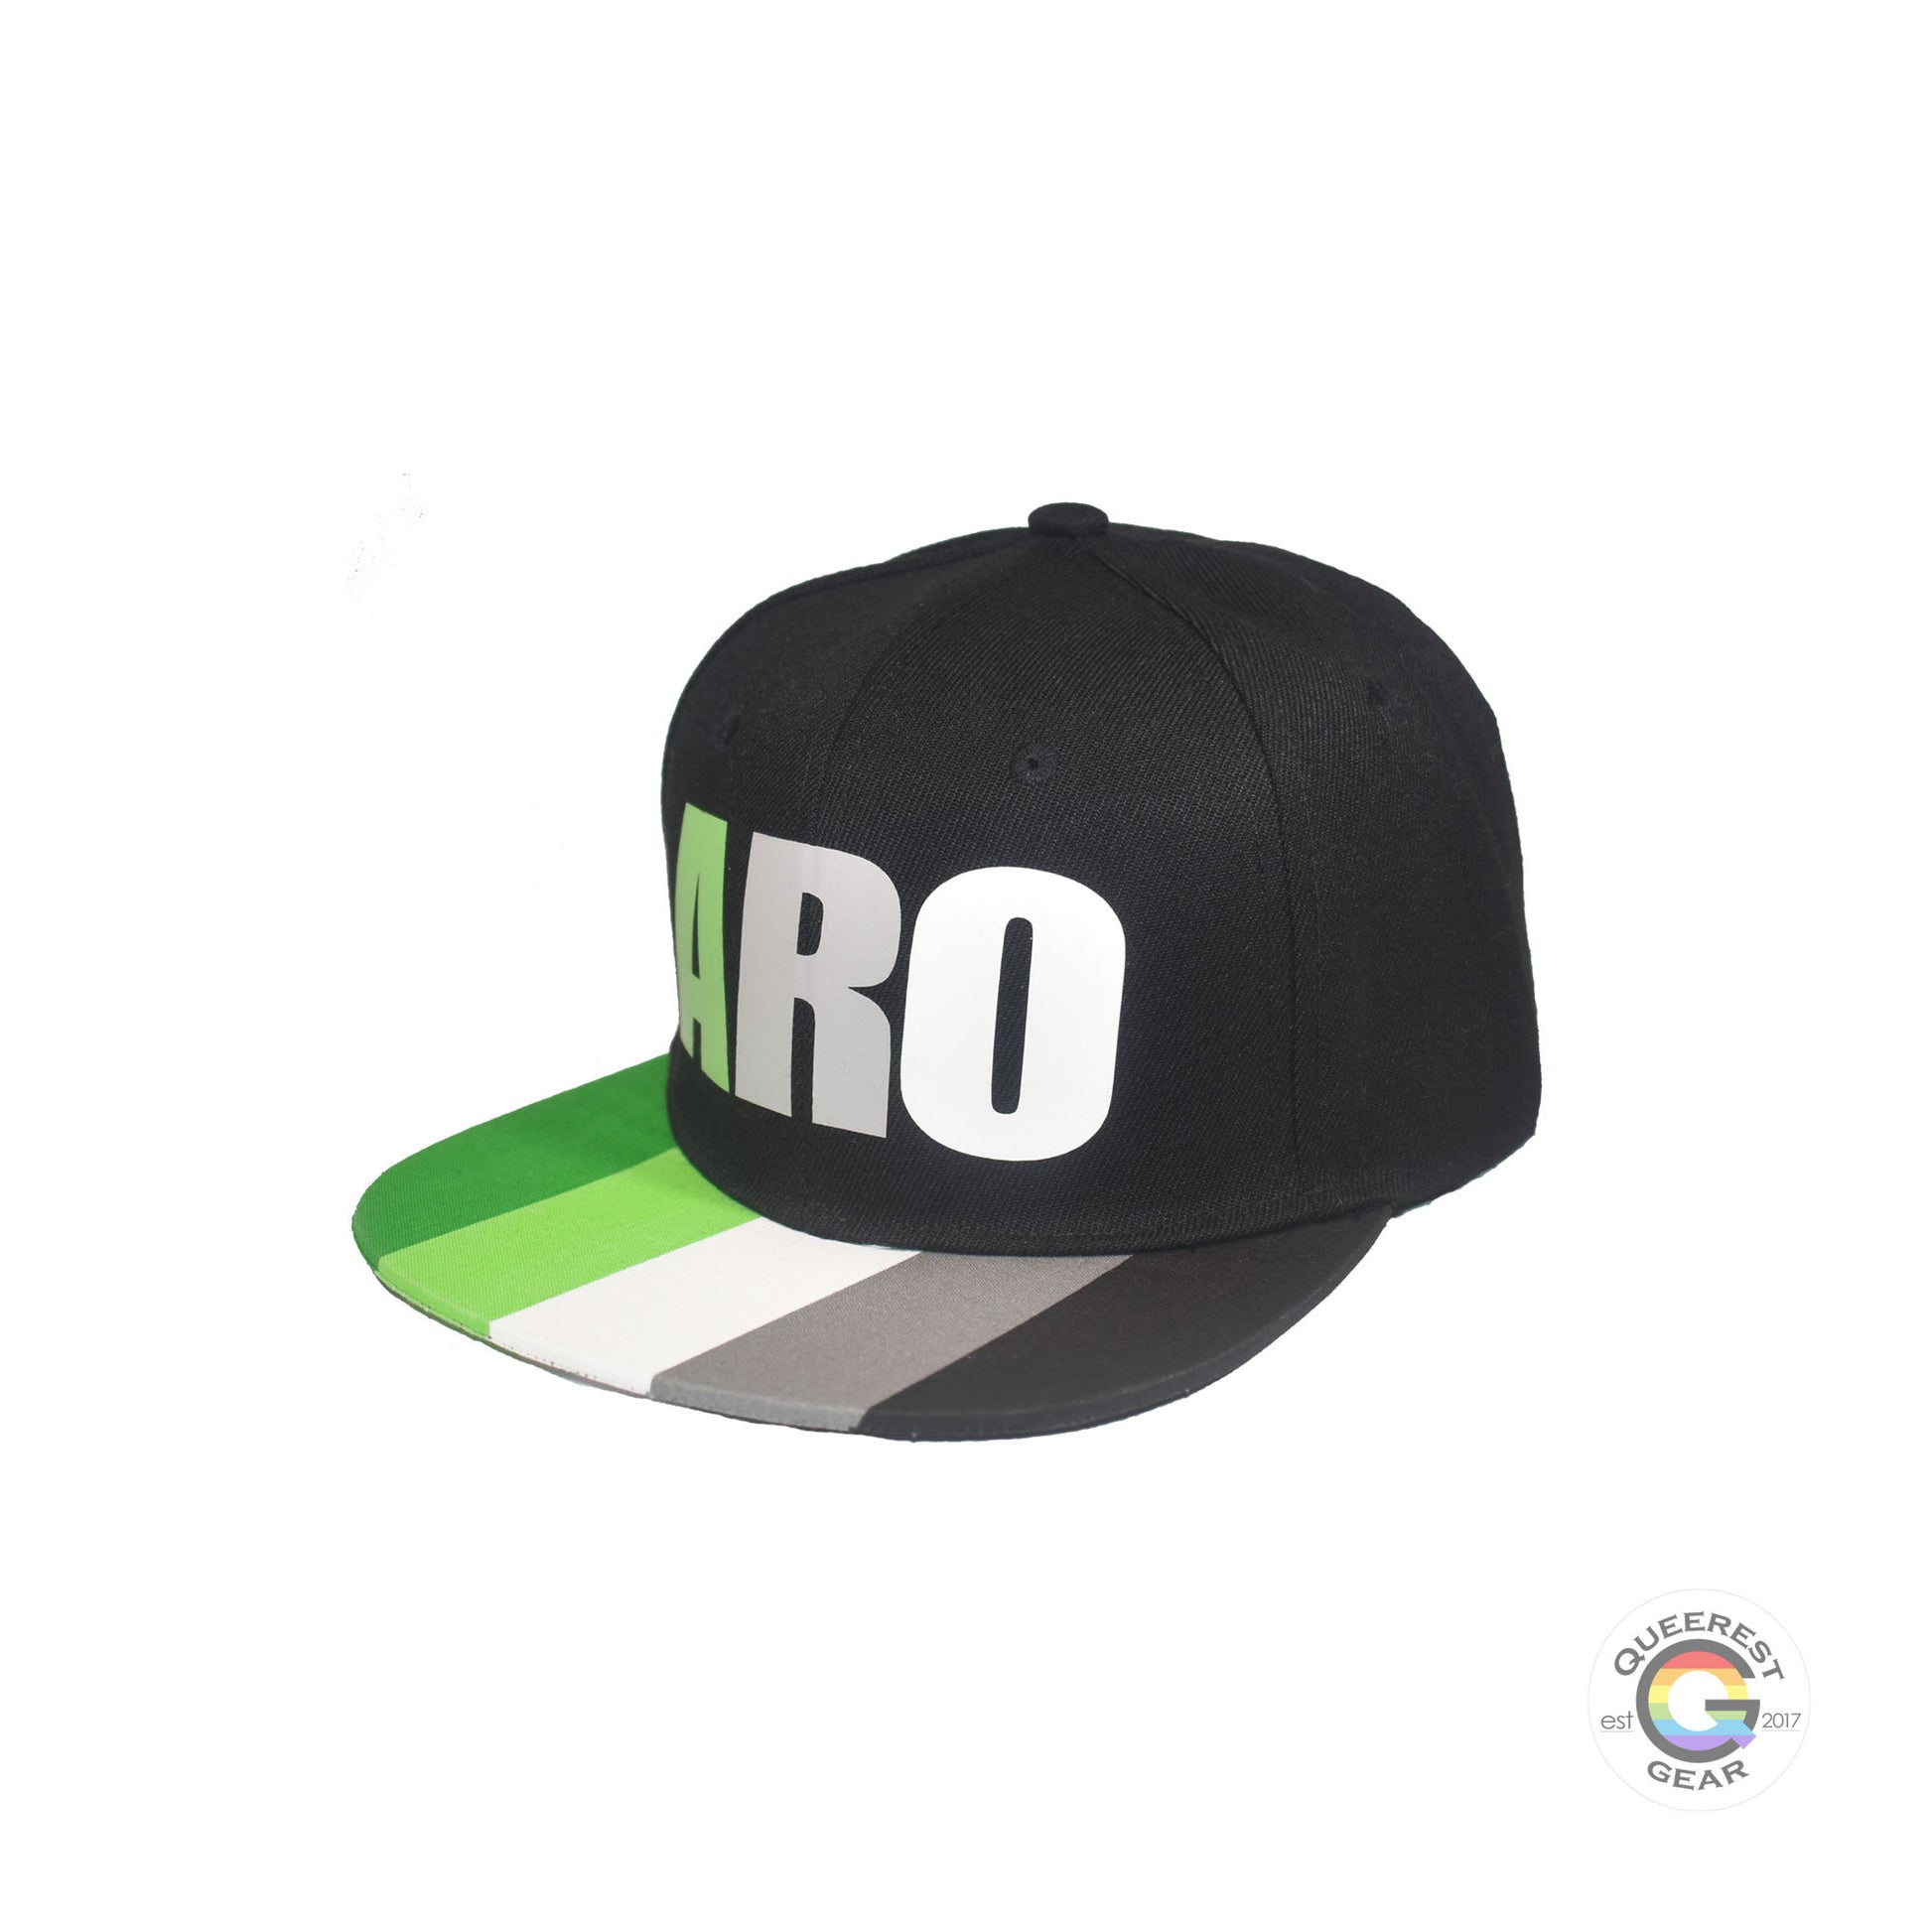 Black flat bill snapback hat. The brim has the aromantic pride flag on both sides and the front of the hat has the word “ARO” in green, grey, and white. Front left view